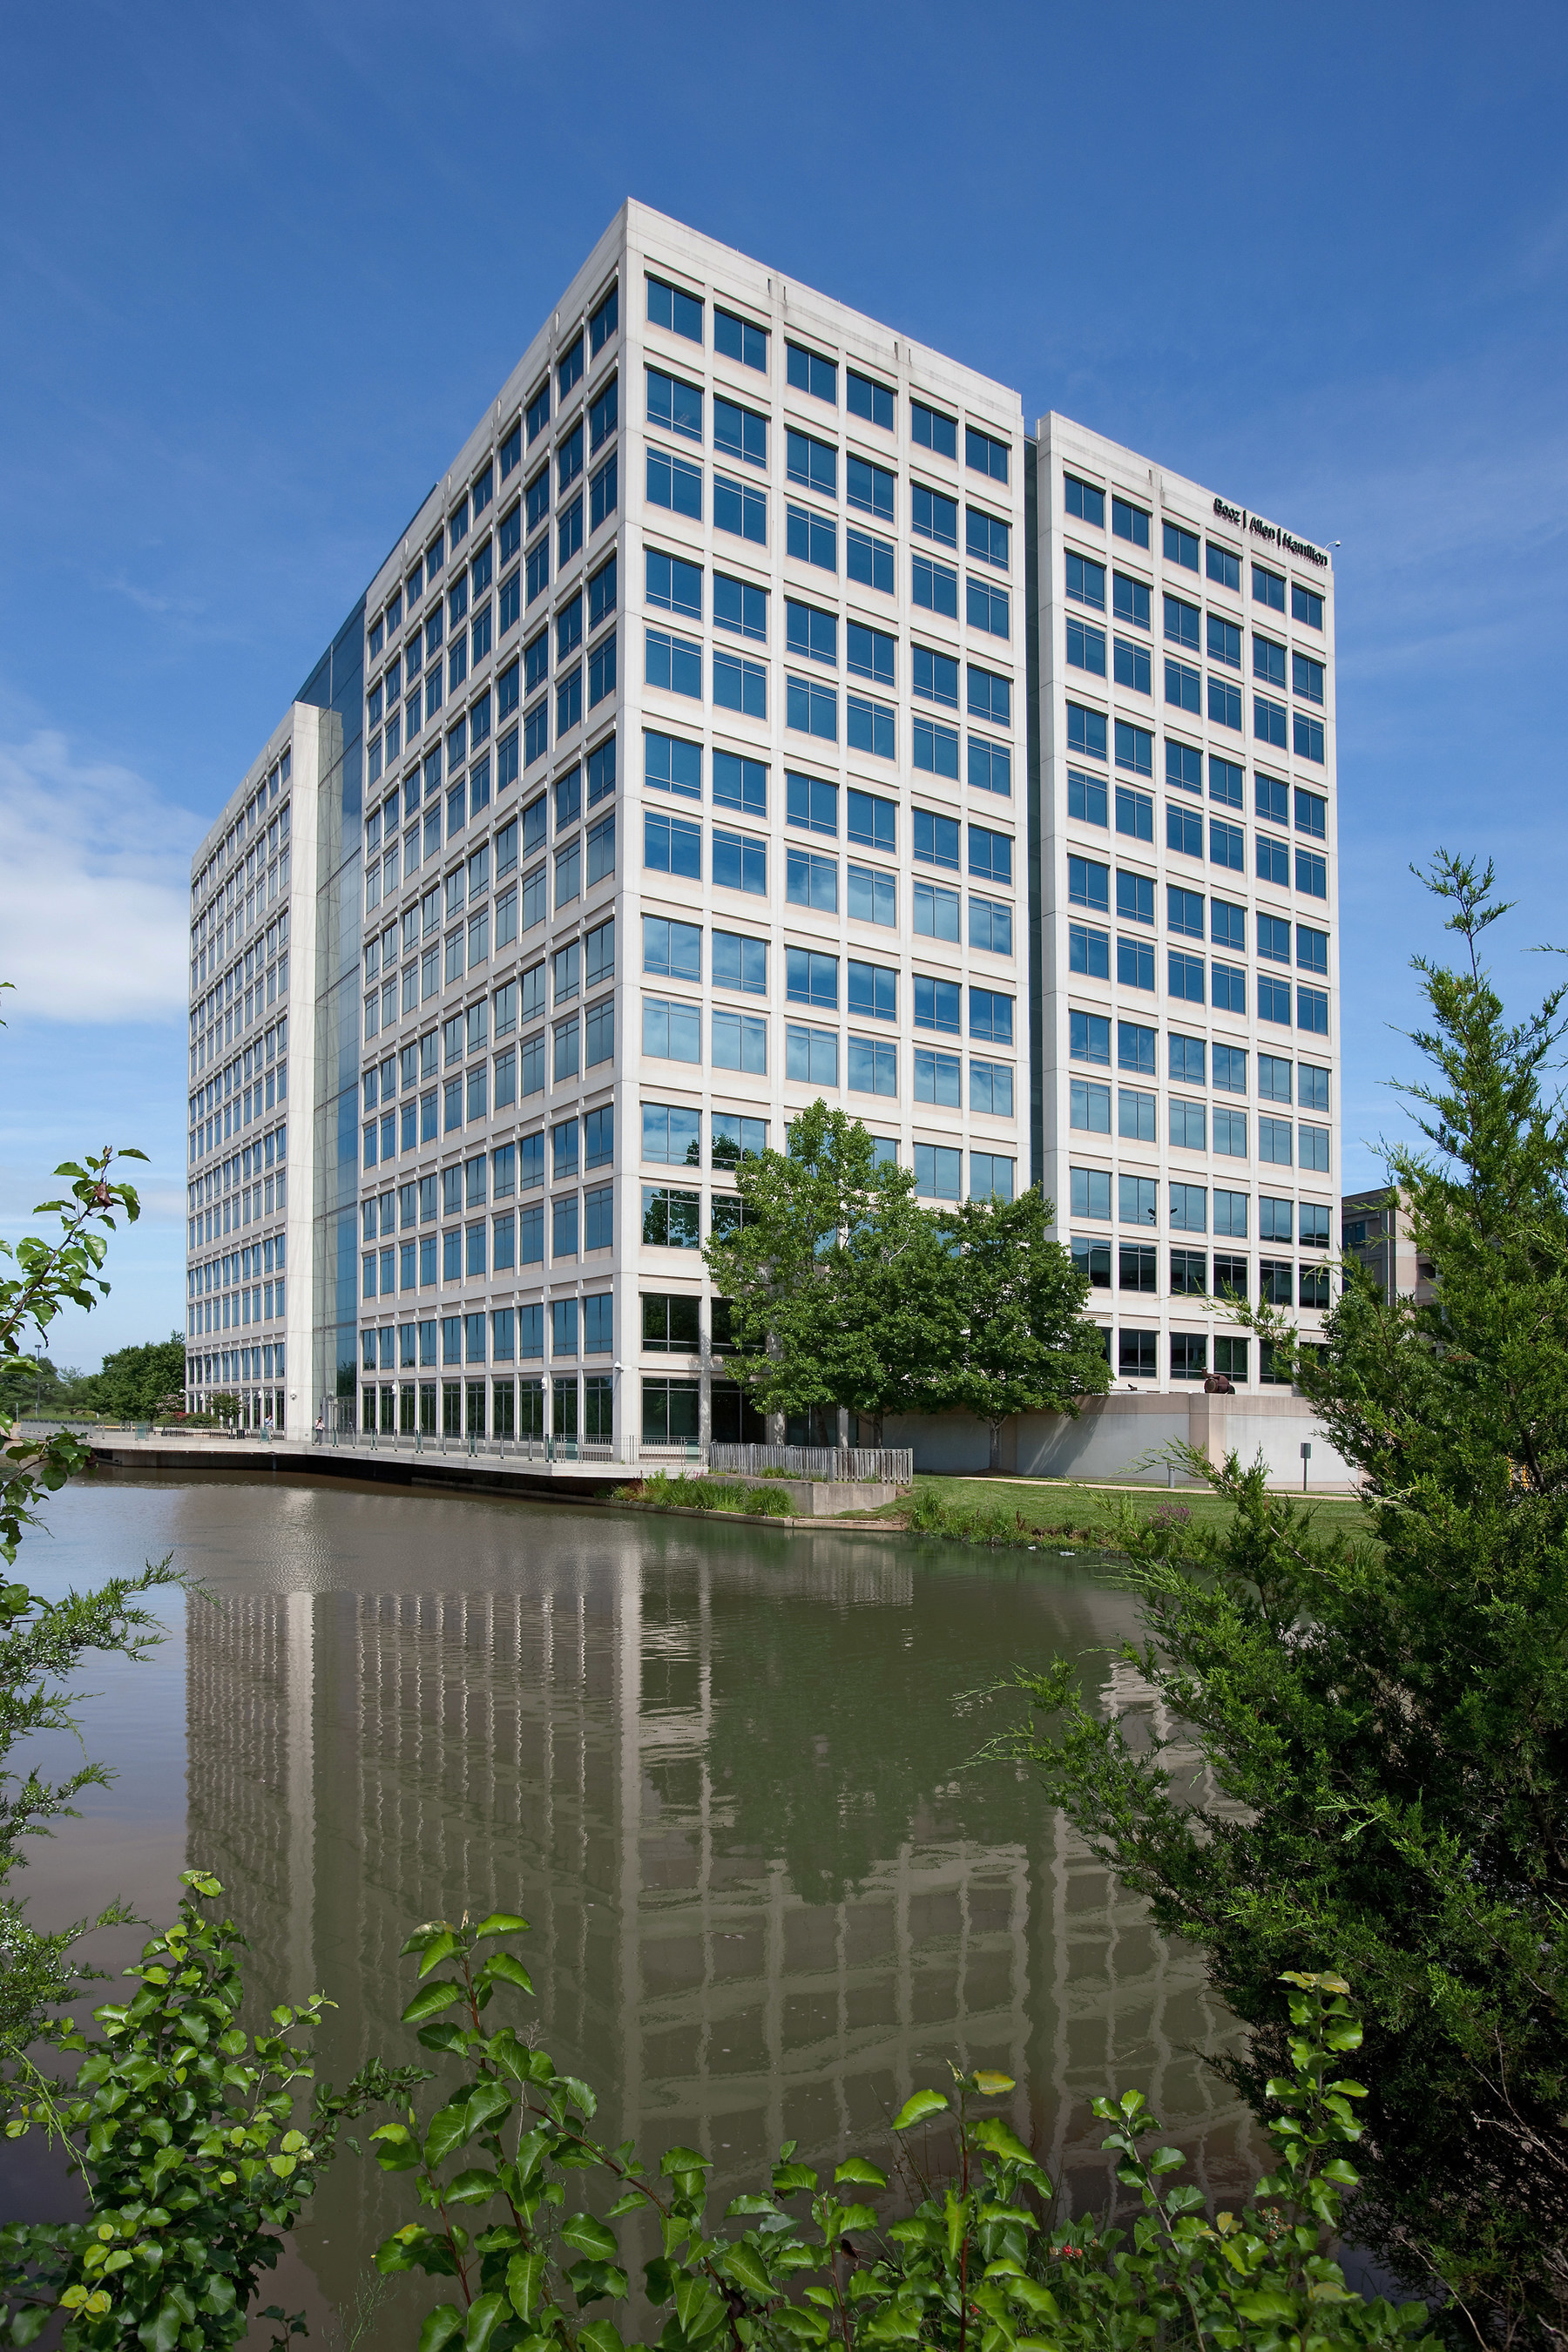 Federal Capital Partners(R) (FCP) announced on Oct. 28th, 2015, the $84 million acquisition of One Dulles Tower, a 400,000 square foot Class A office building prominently located at 13200 Woodland Park Drive on the Dulles Toll Road in Herndon, VA, just two miles east of Dulles Airport.